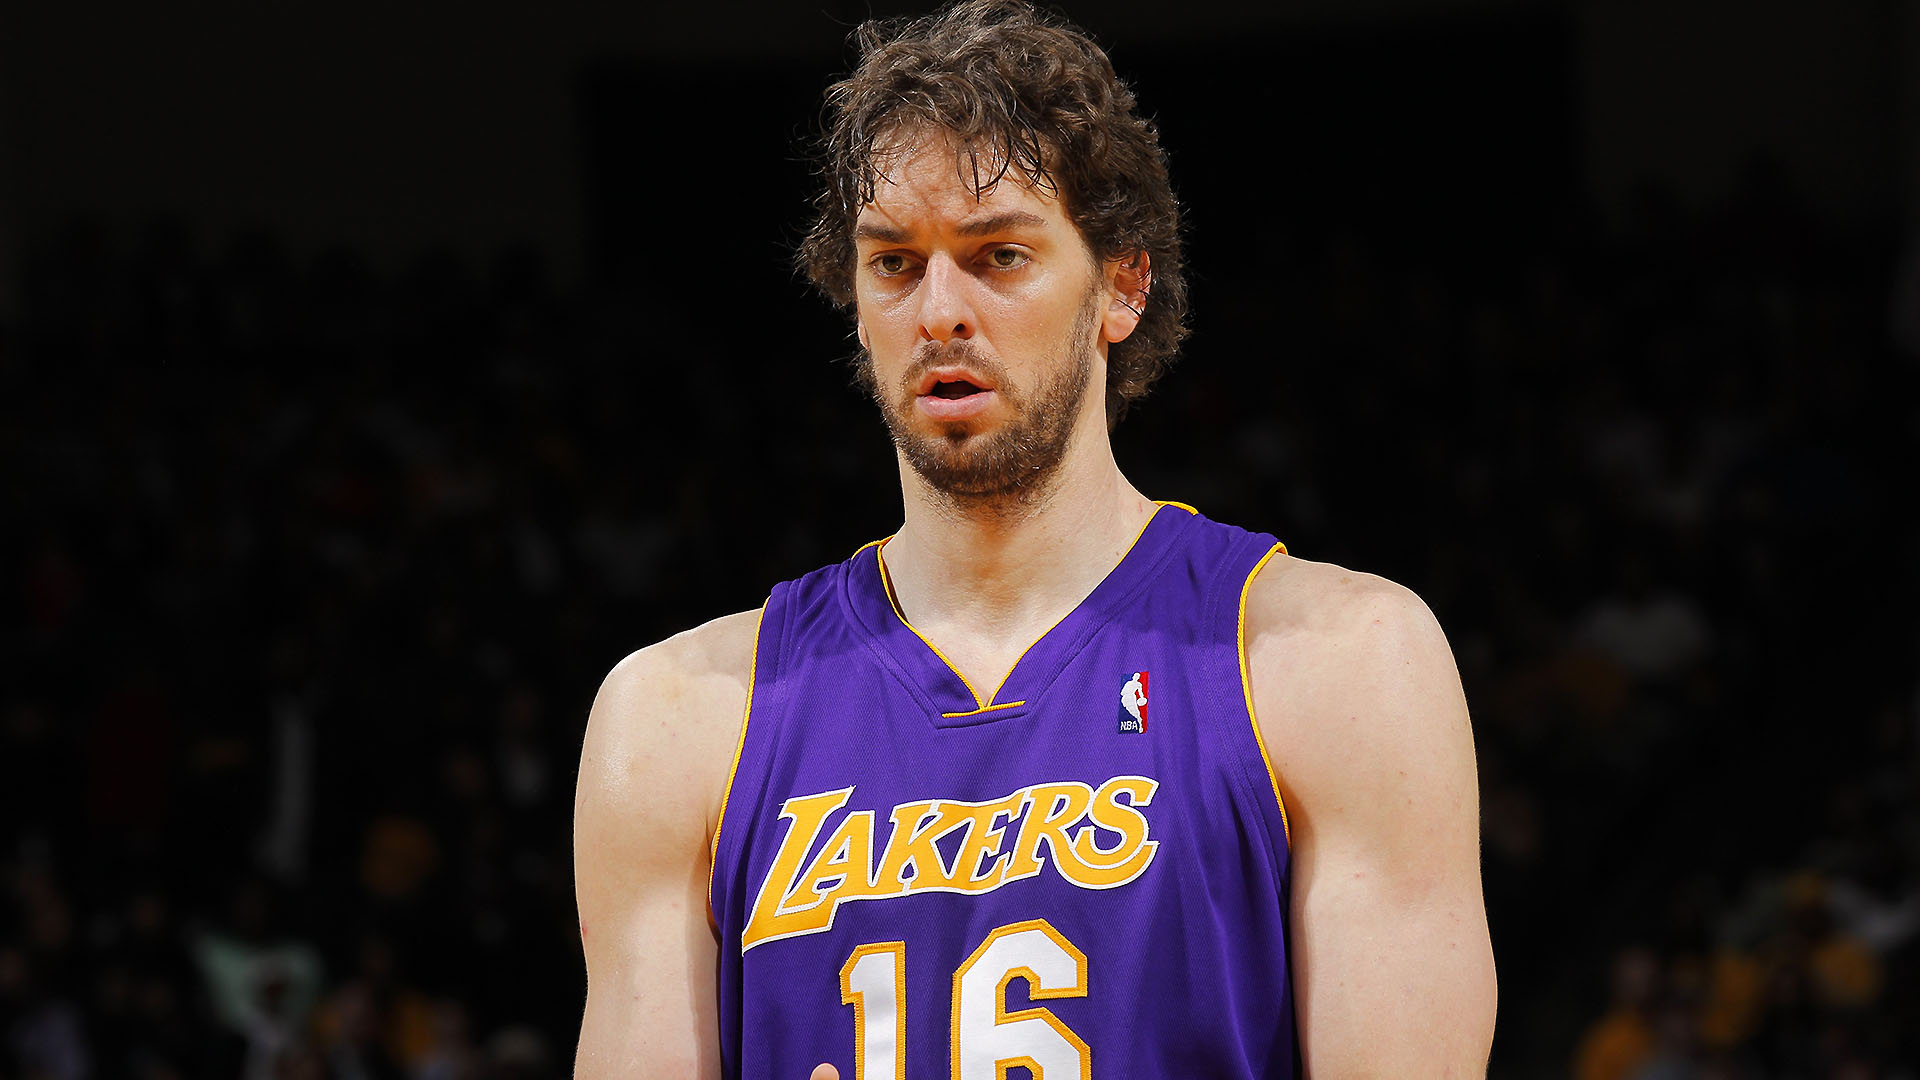 1920x1080 Pau Gasol retires, Lakers reportedly planning to hang up No. 16